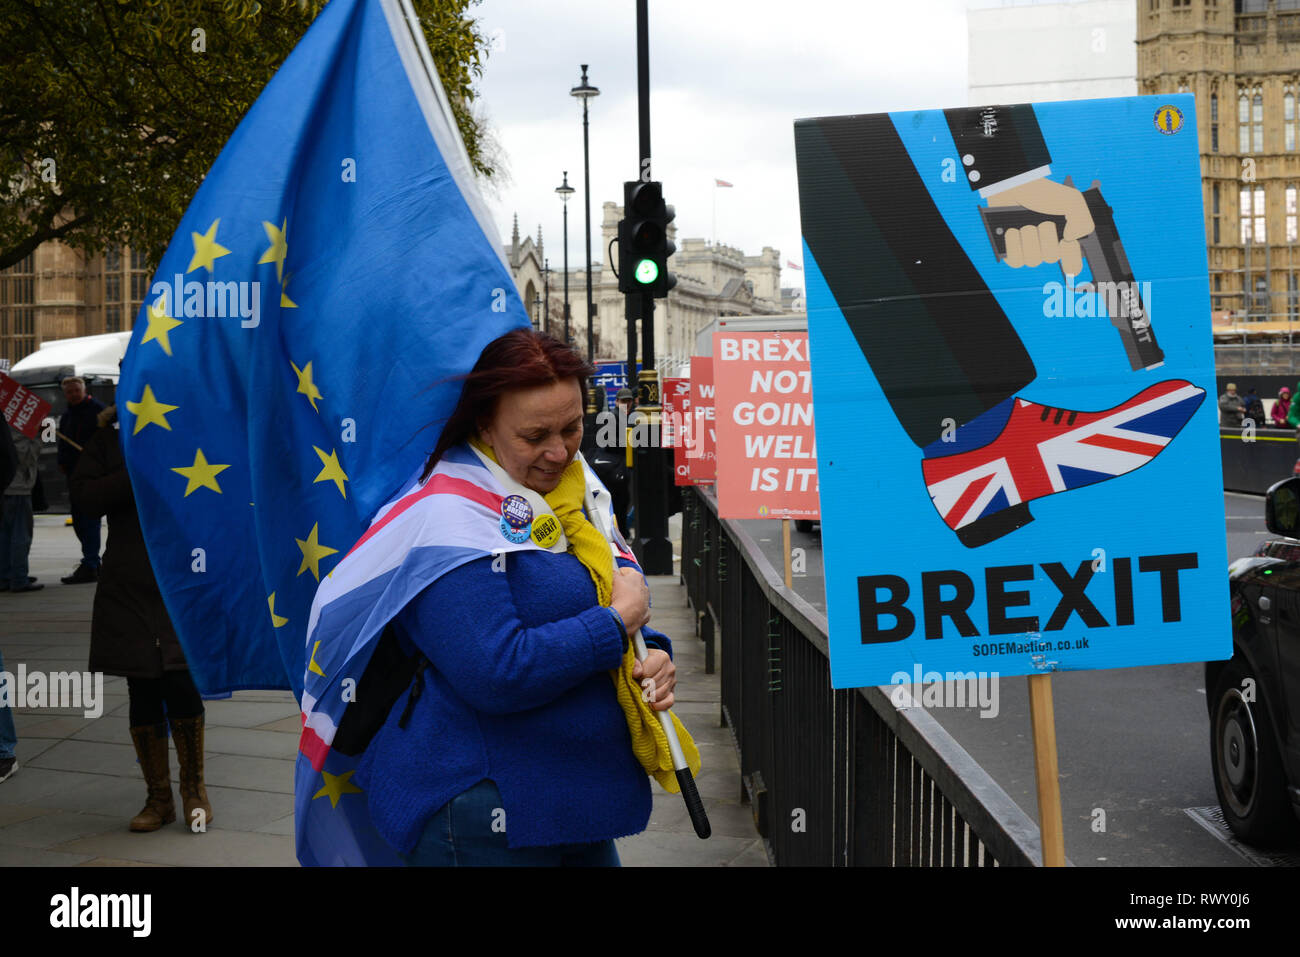 Westminster, London, UK. 7th Mar 2019. Anti-Brexit Activist demonstrate opposite Palace Of Westminster in London. Credit: Thomas Krych/Alamy Live News Stock Photo